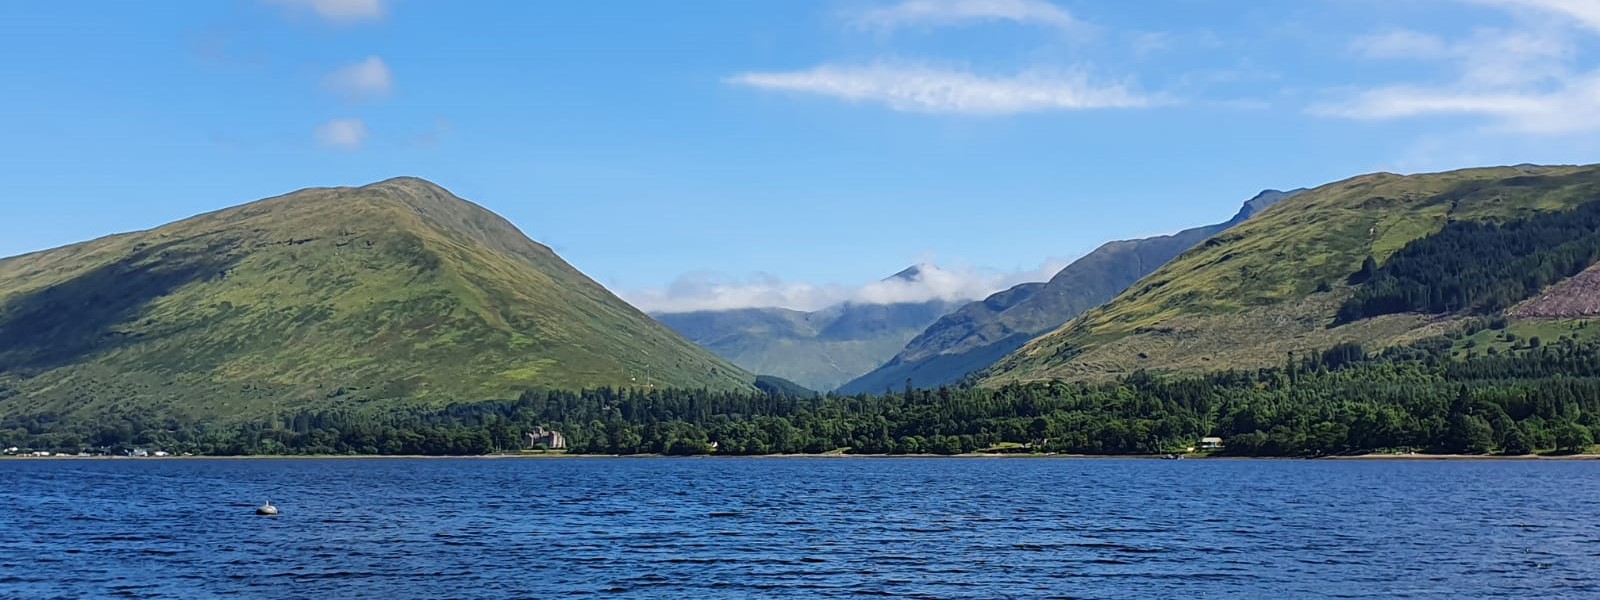 View of Scottish hills and loch